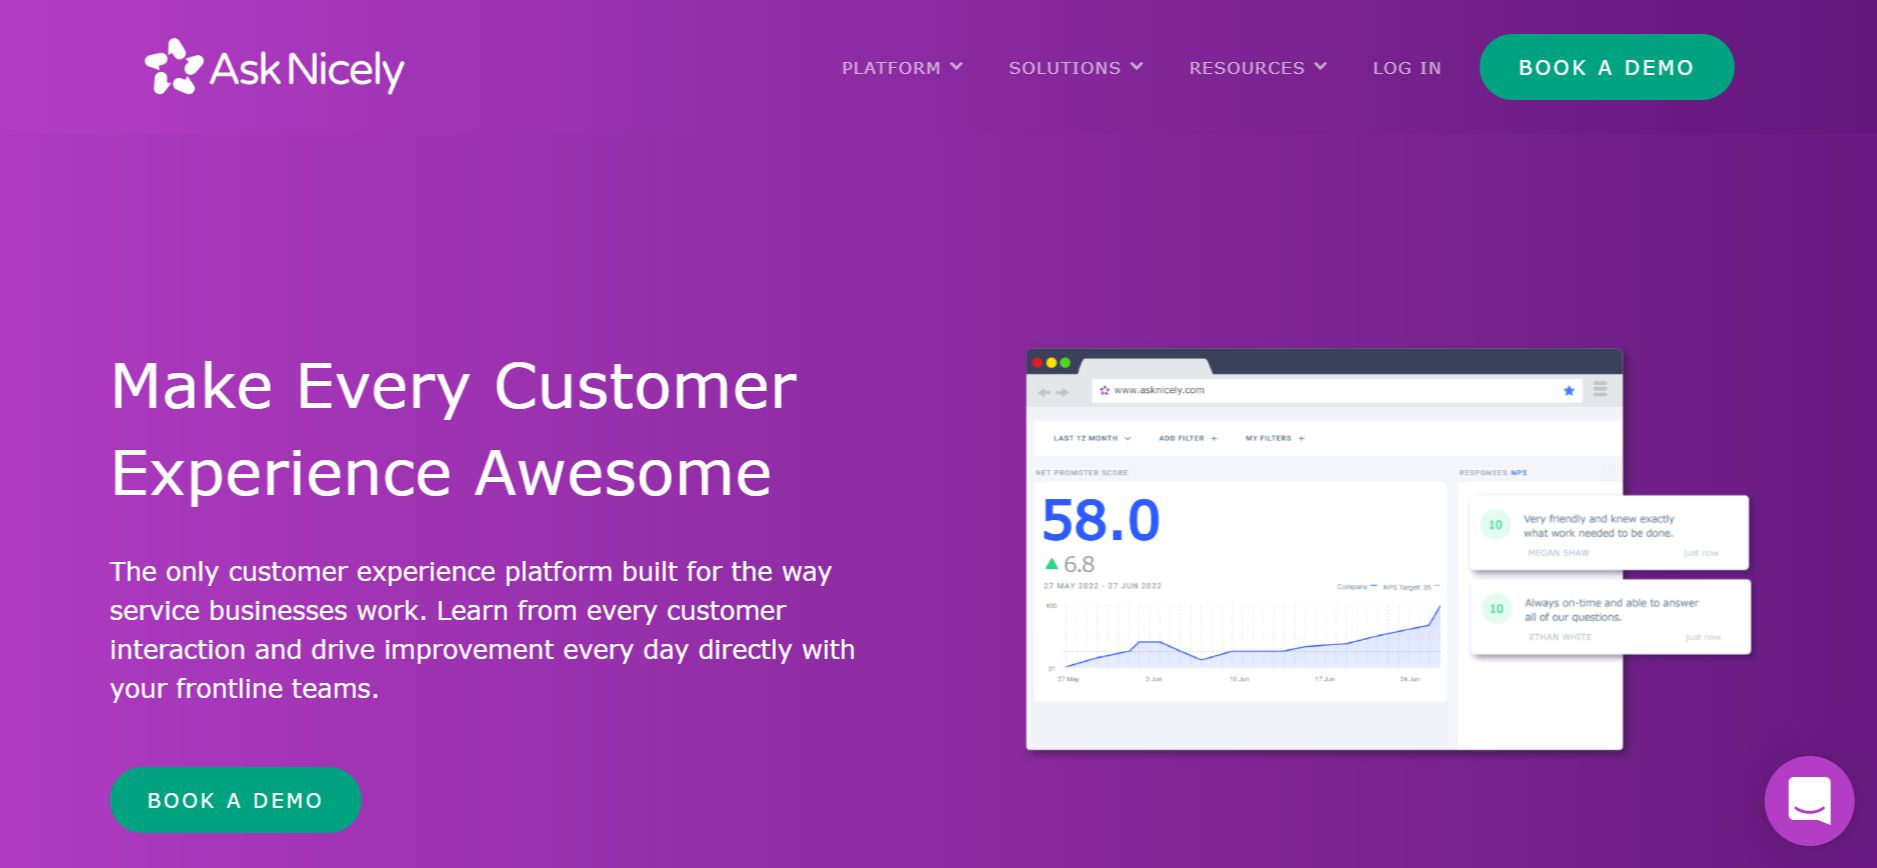 asknicely is one of the best nps tools